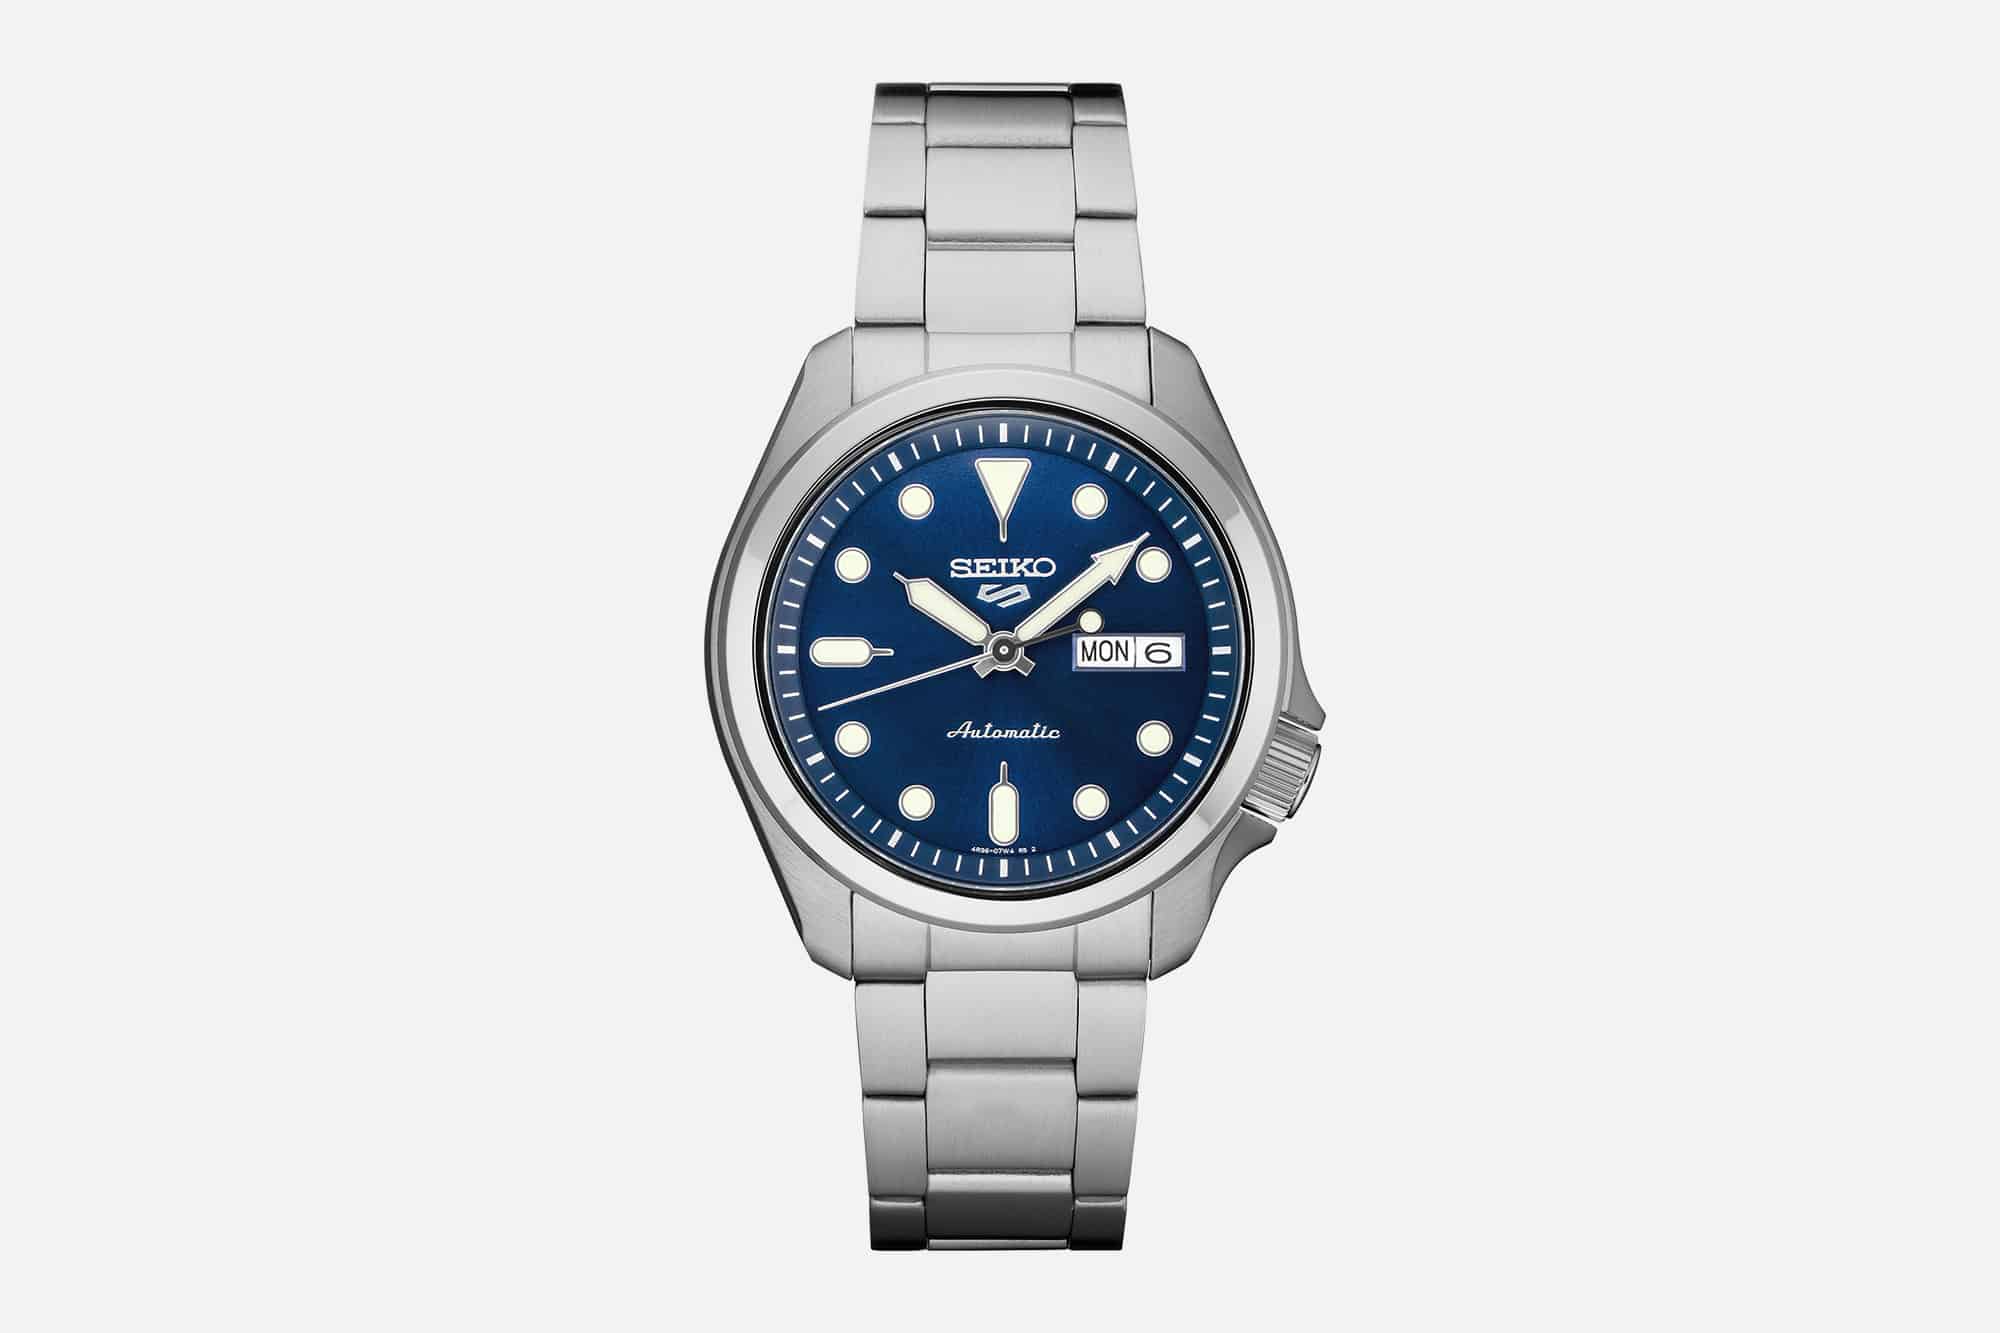 Seiko ditches ratcheting bezel for new Seiko 5 Sports models